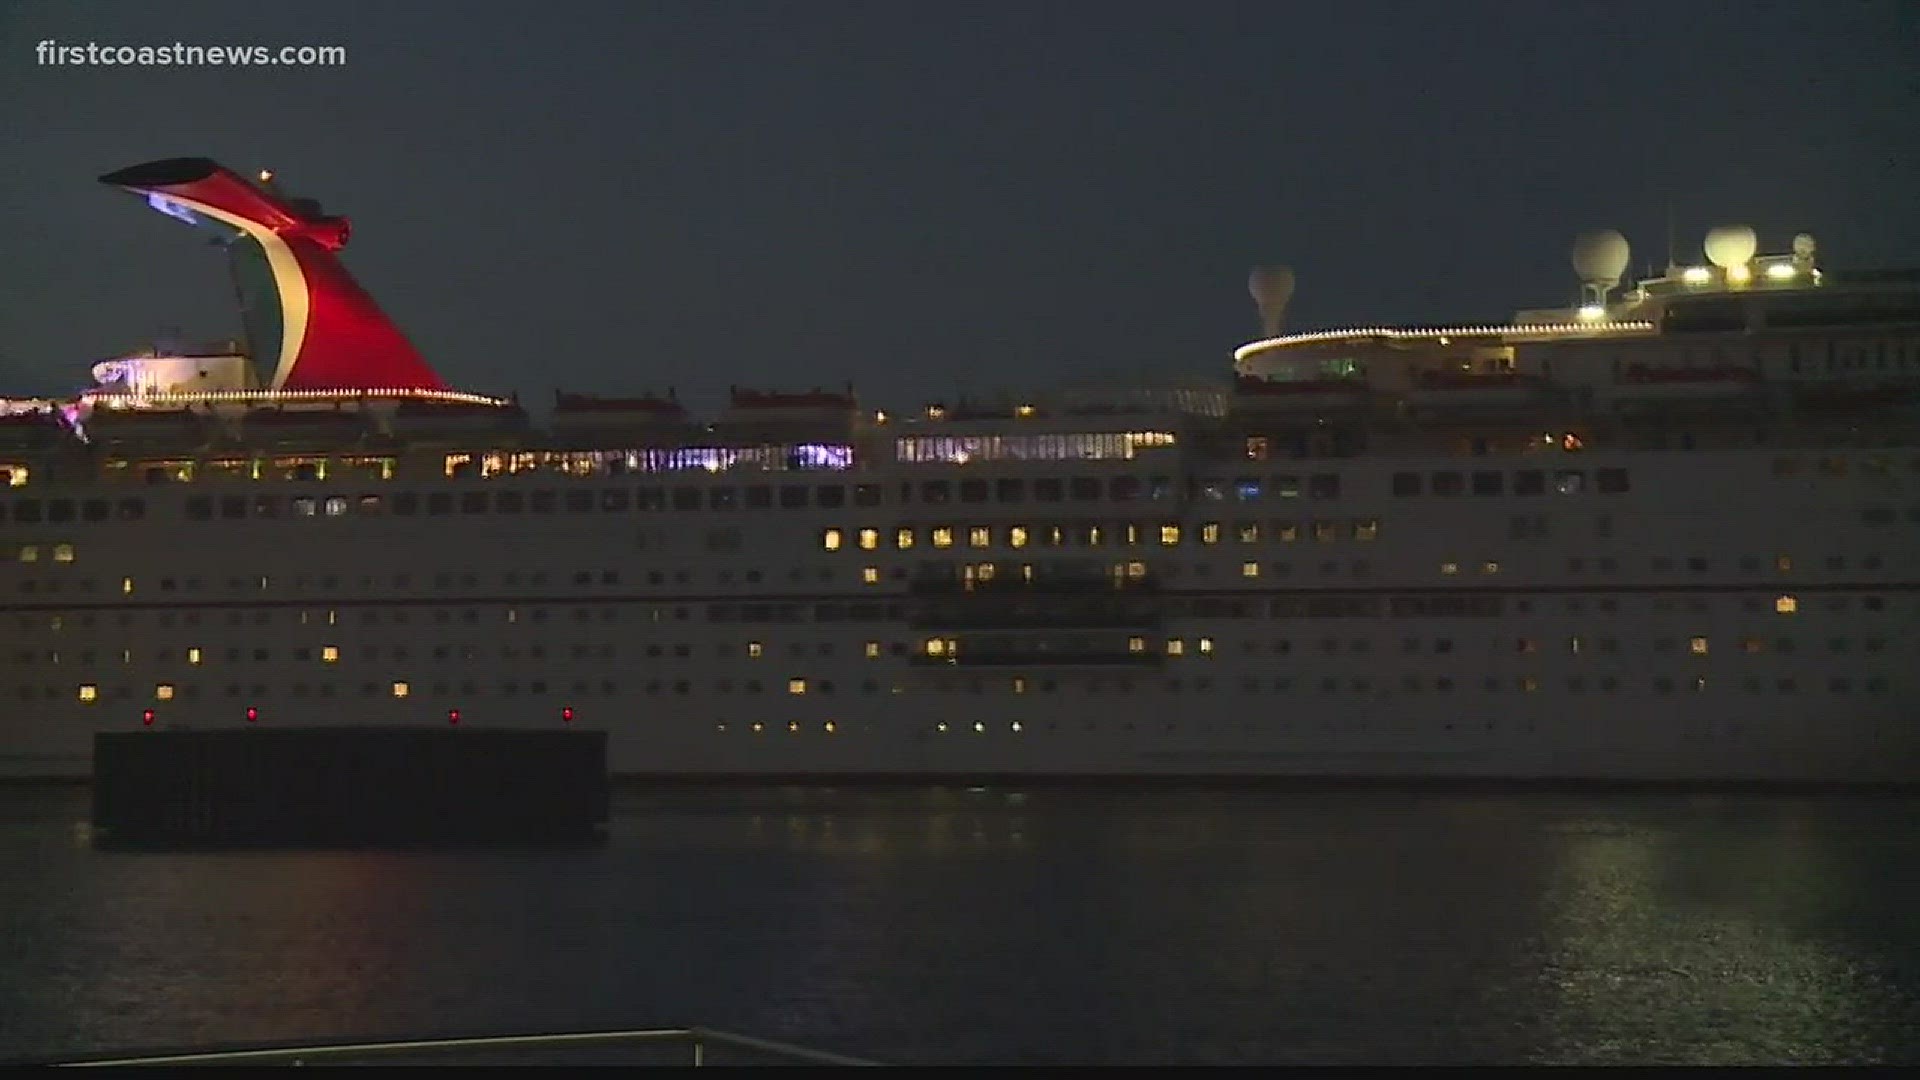 An adult woman reported that an unknown man made unwanted sexual advances toward her while onboard the Carnival Elation cruise ship, according to the FBI report.